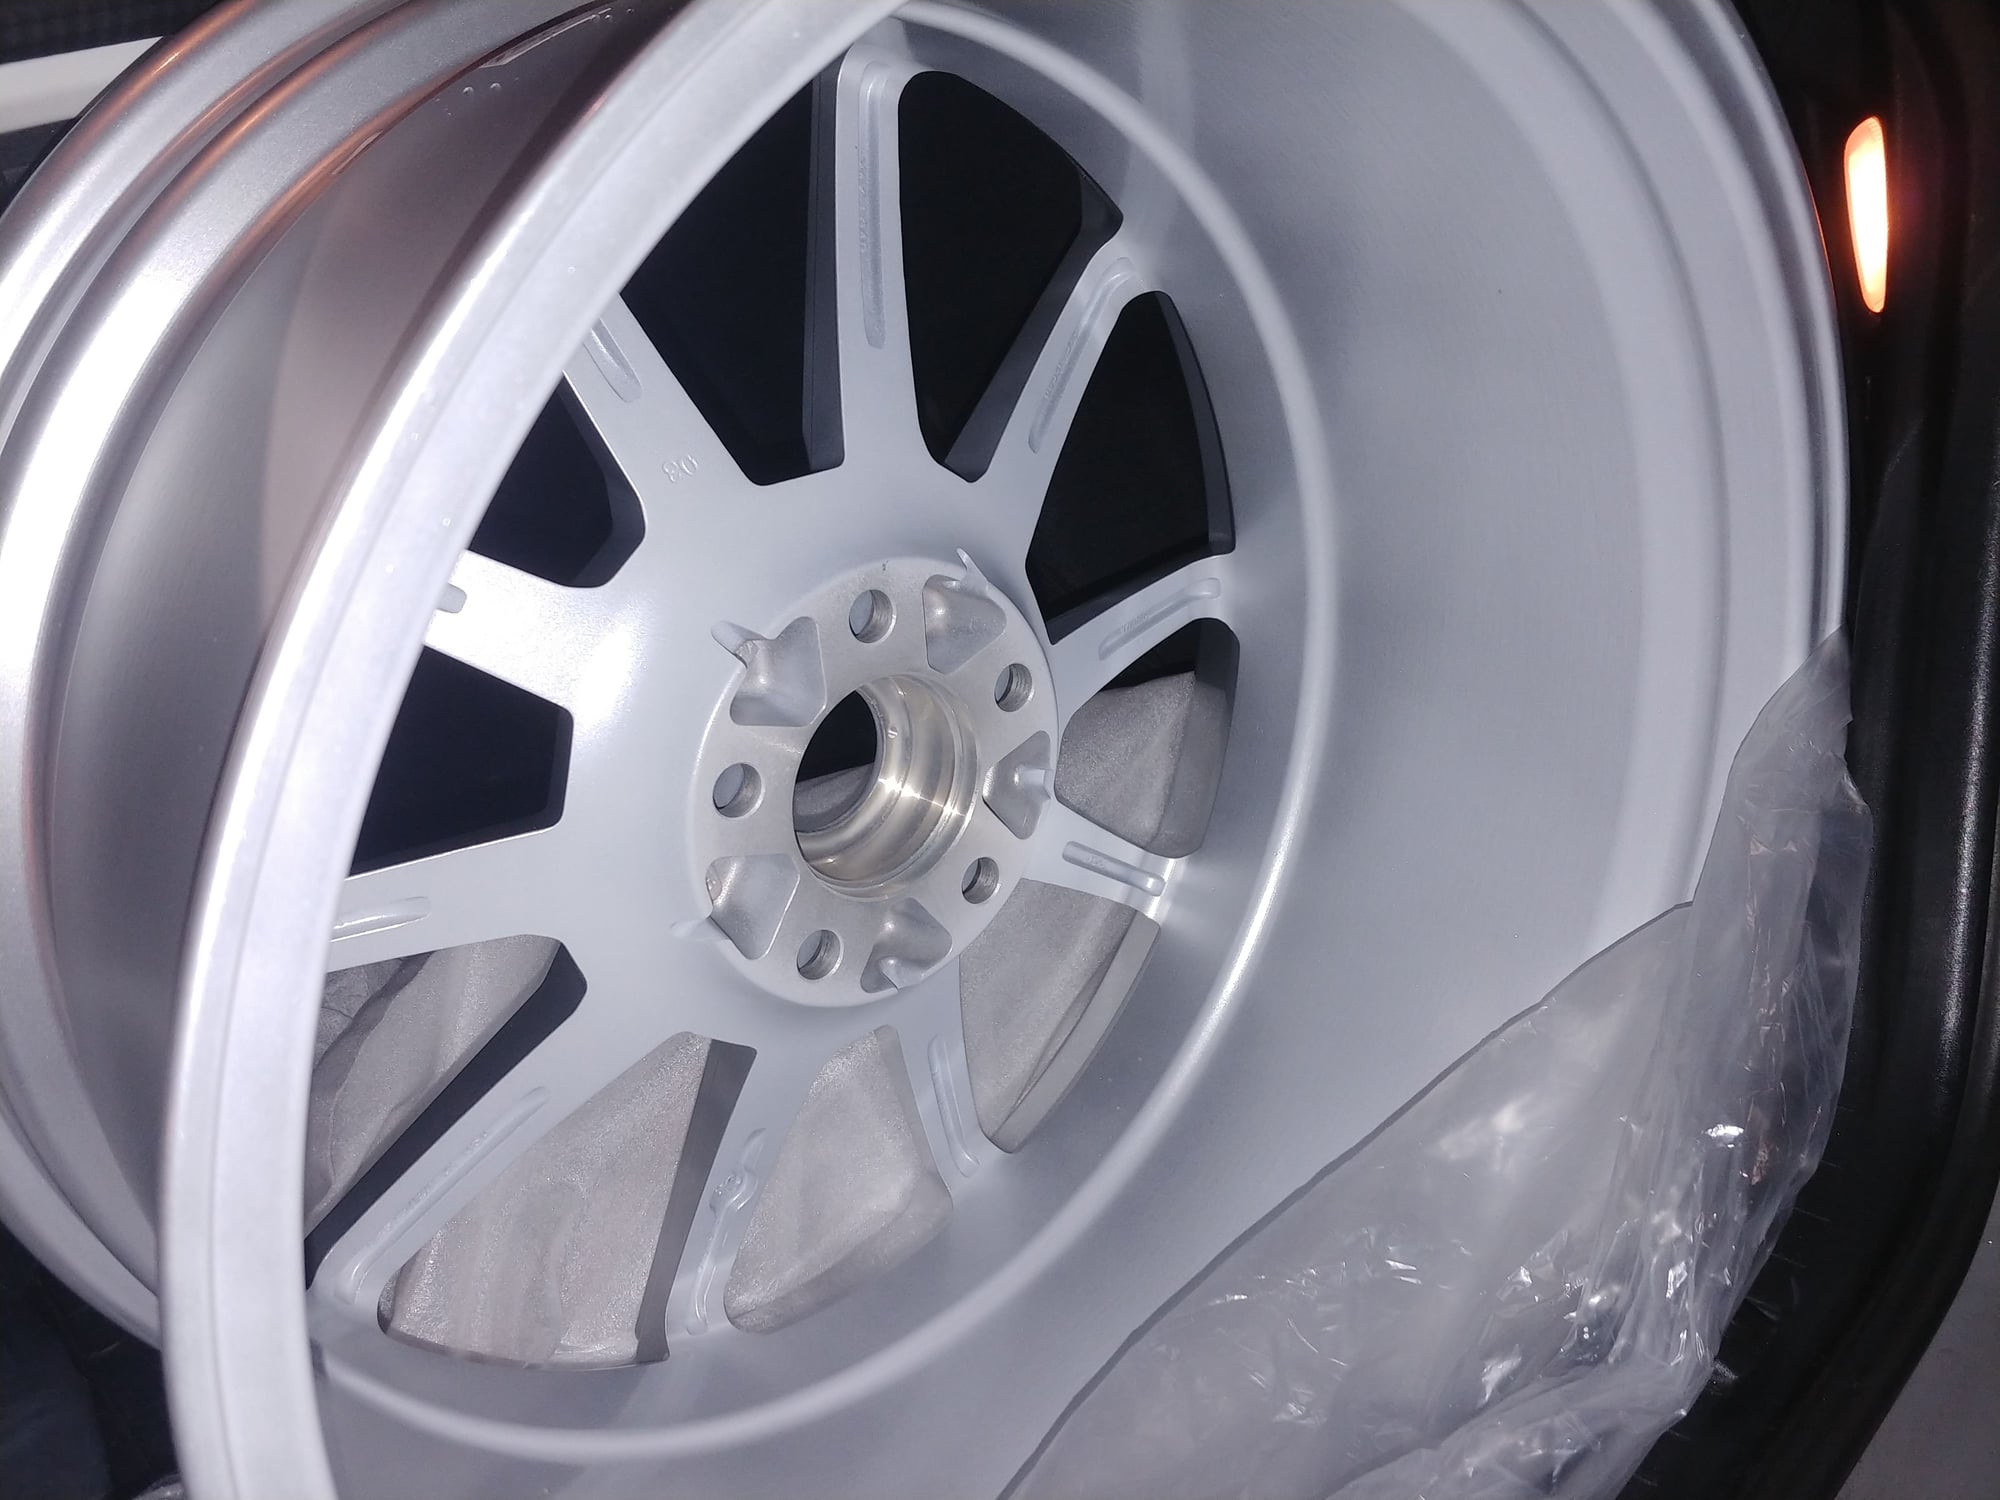 Wheels and Tires/Axles - 19x9.5 +35 wheels with New 245/35-19 Tires - TSW Sonoma - HRE FF04 Style - New - All Years Any Make All Models - San Diego, CA 92101, United States